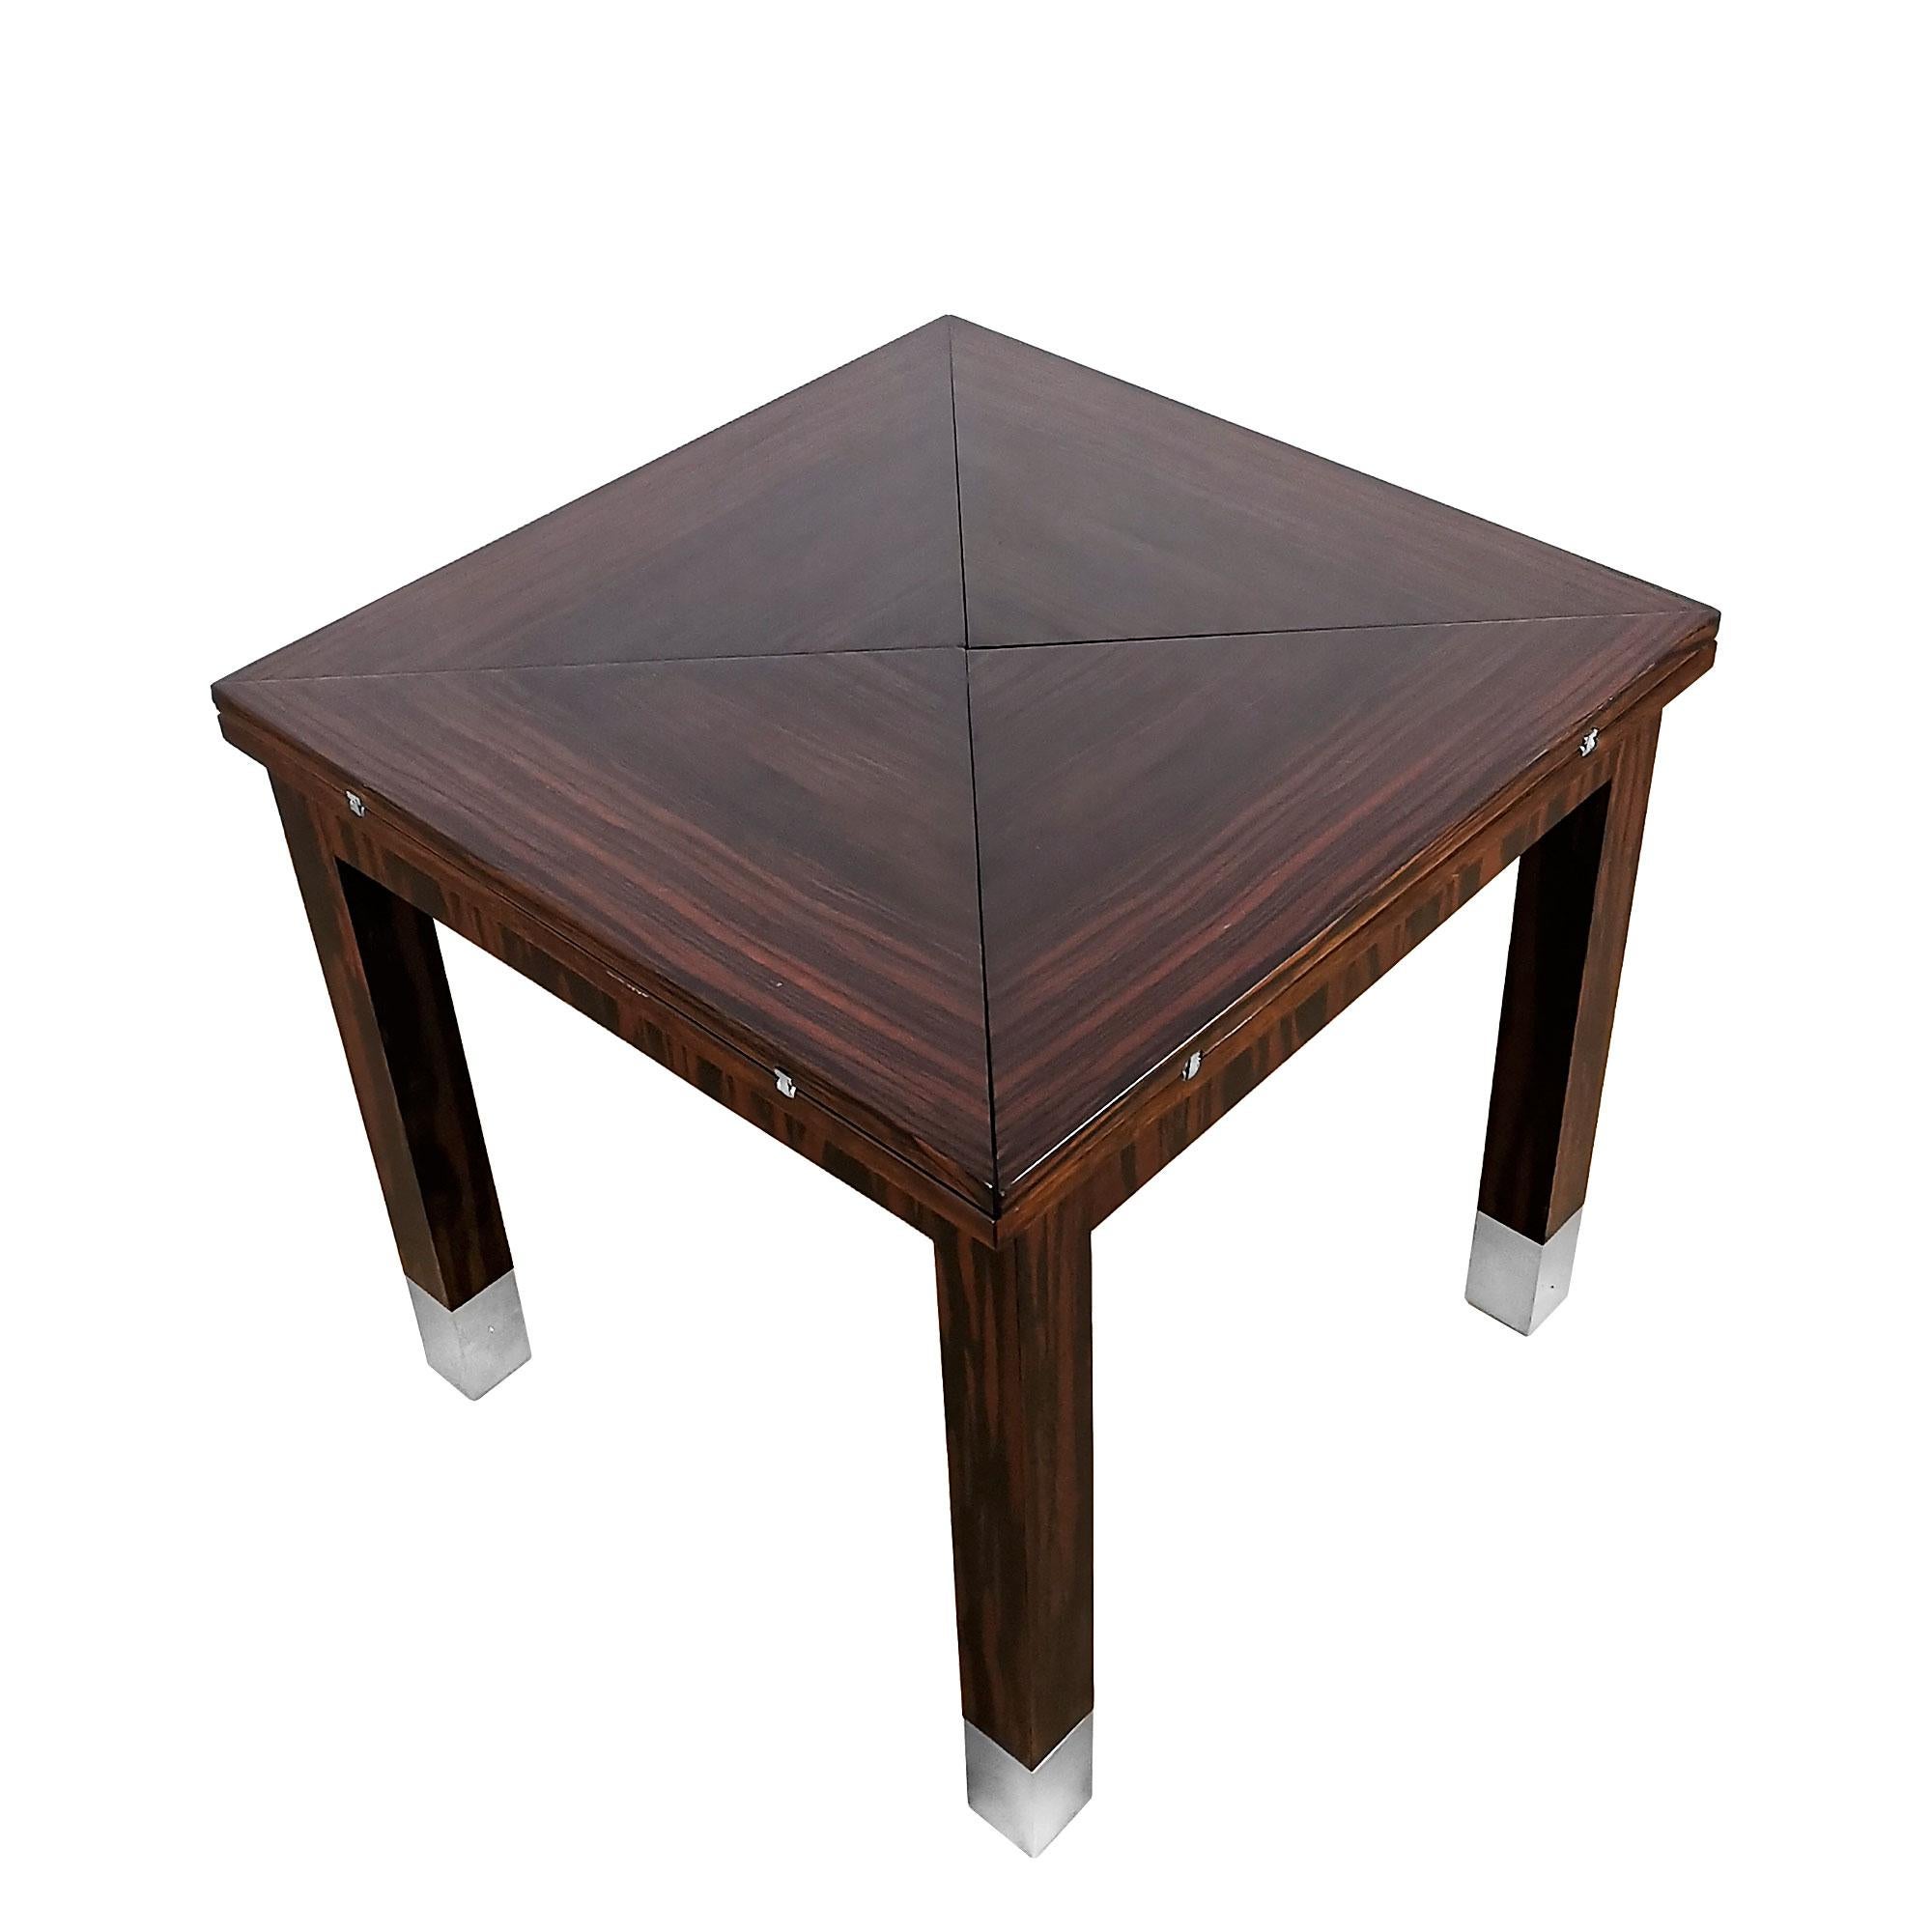 Plated 1930s Art Deco Folding Game Table in Oak, Macassar Ebony and Brass - France For Sale